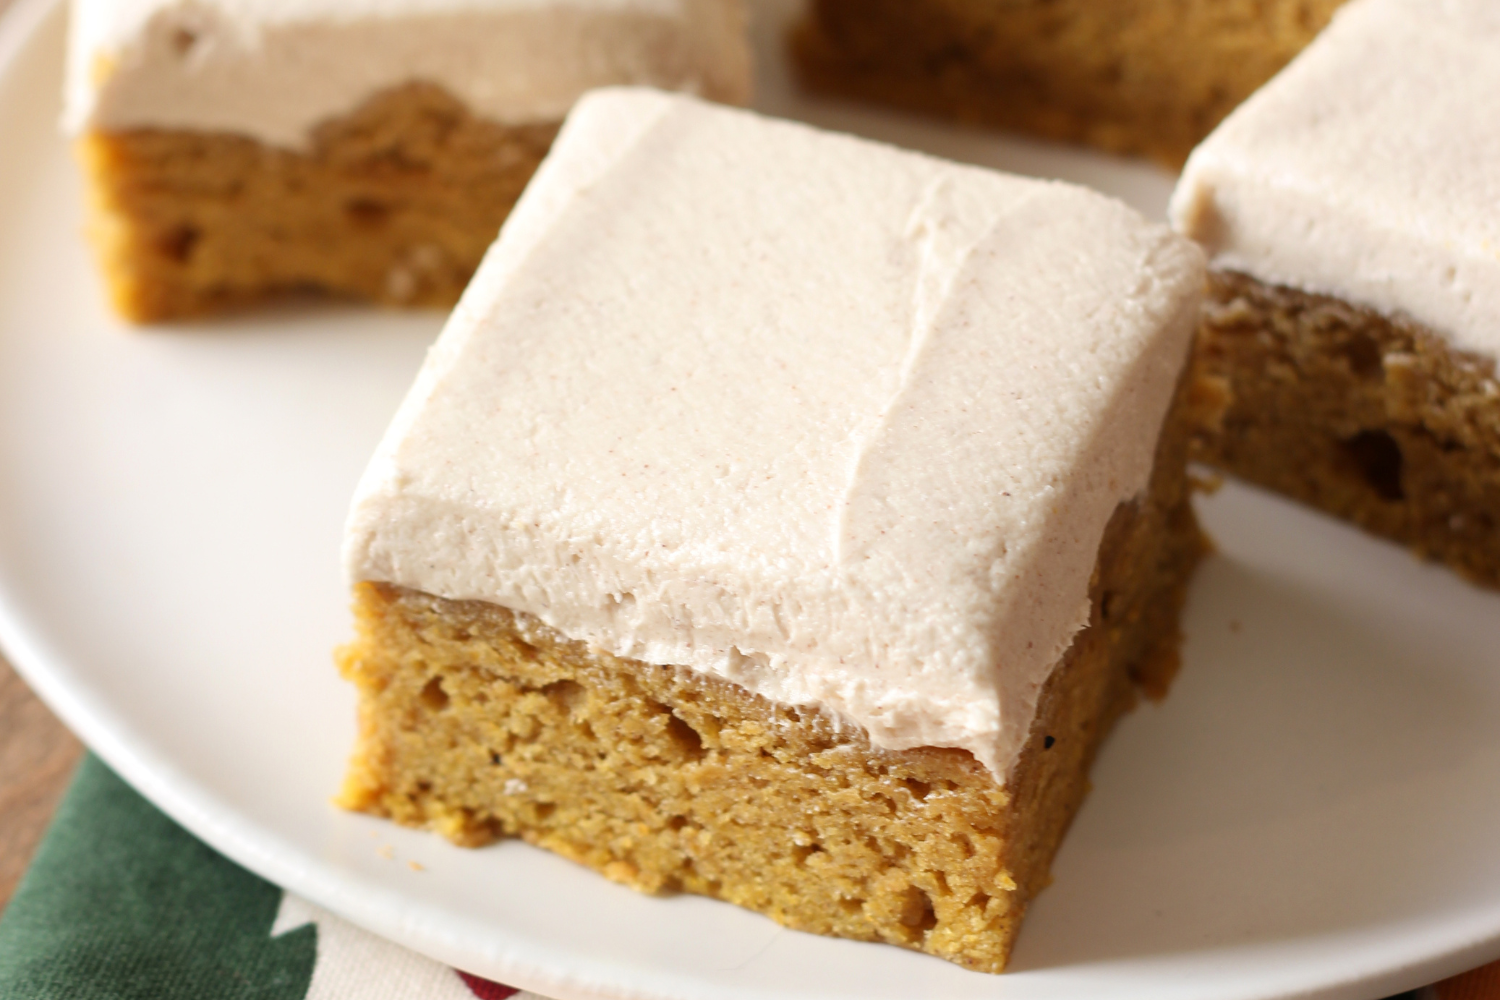 a slice of pumpkin bar with a thick layer of brown sugar frosting on top, sitting on a plate, with more bars behind.